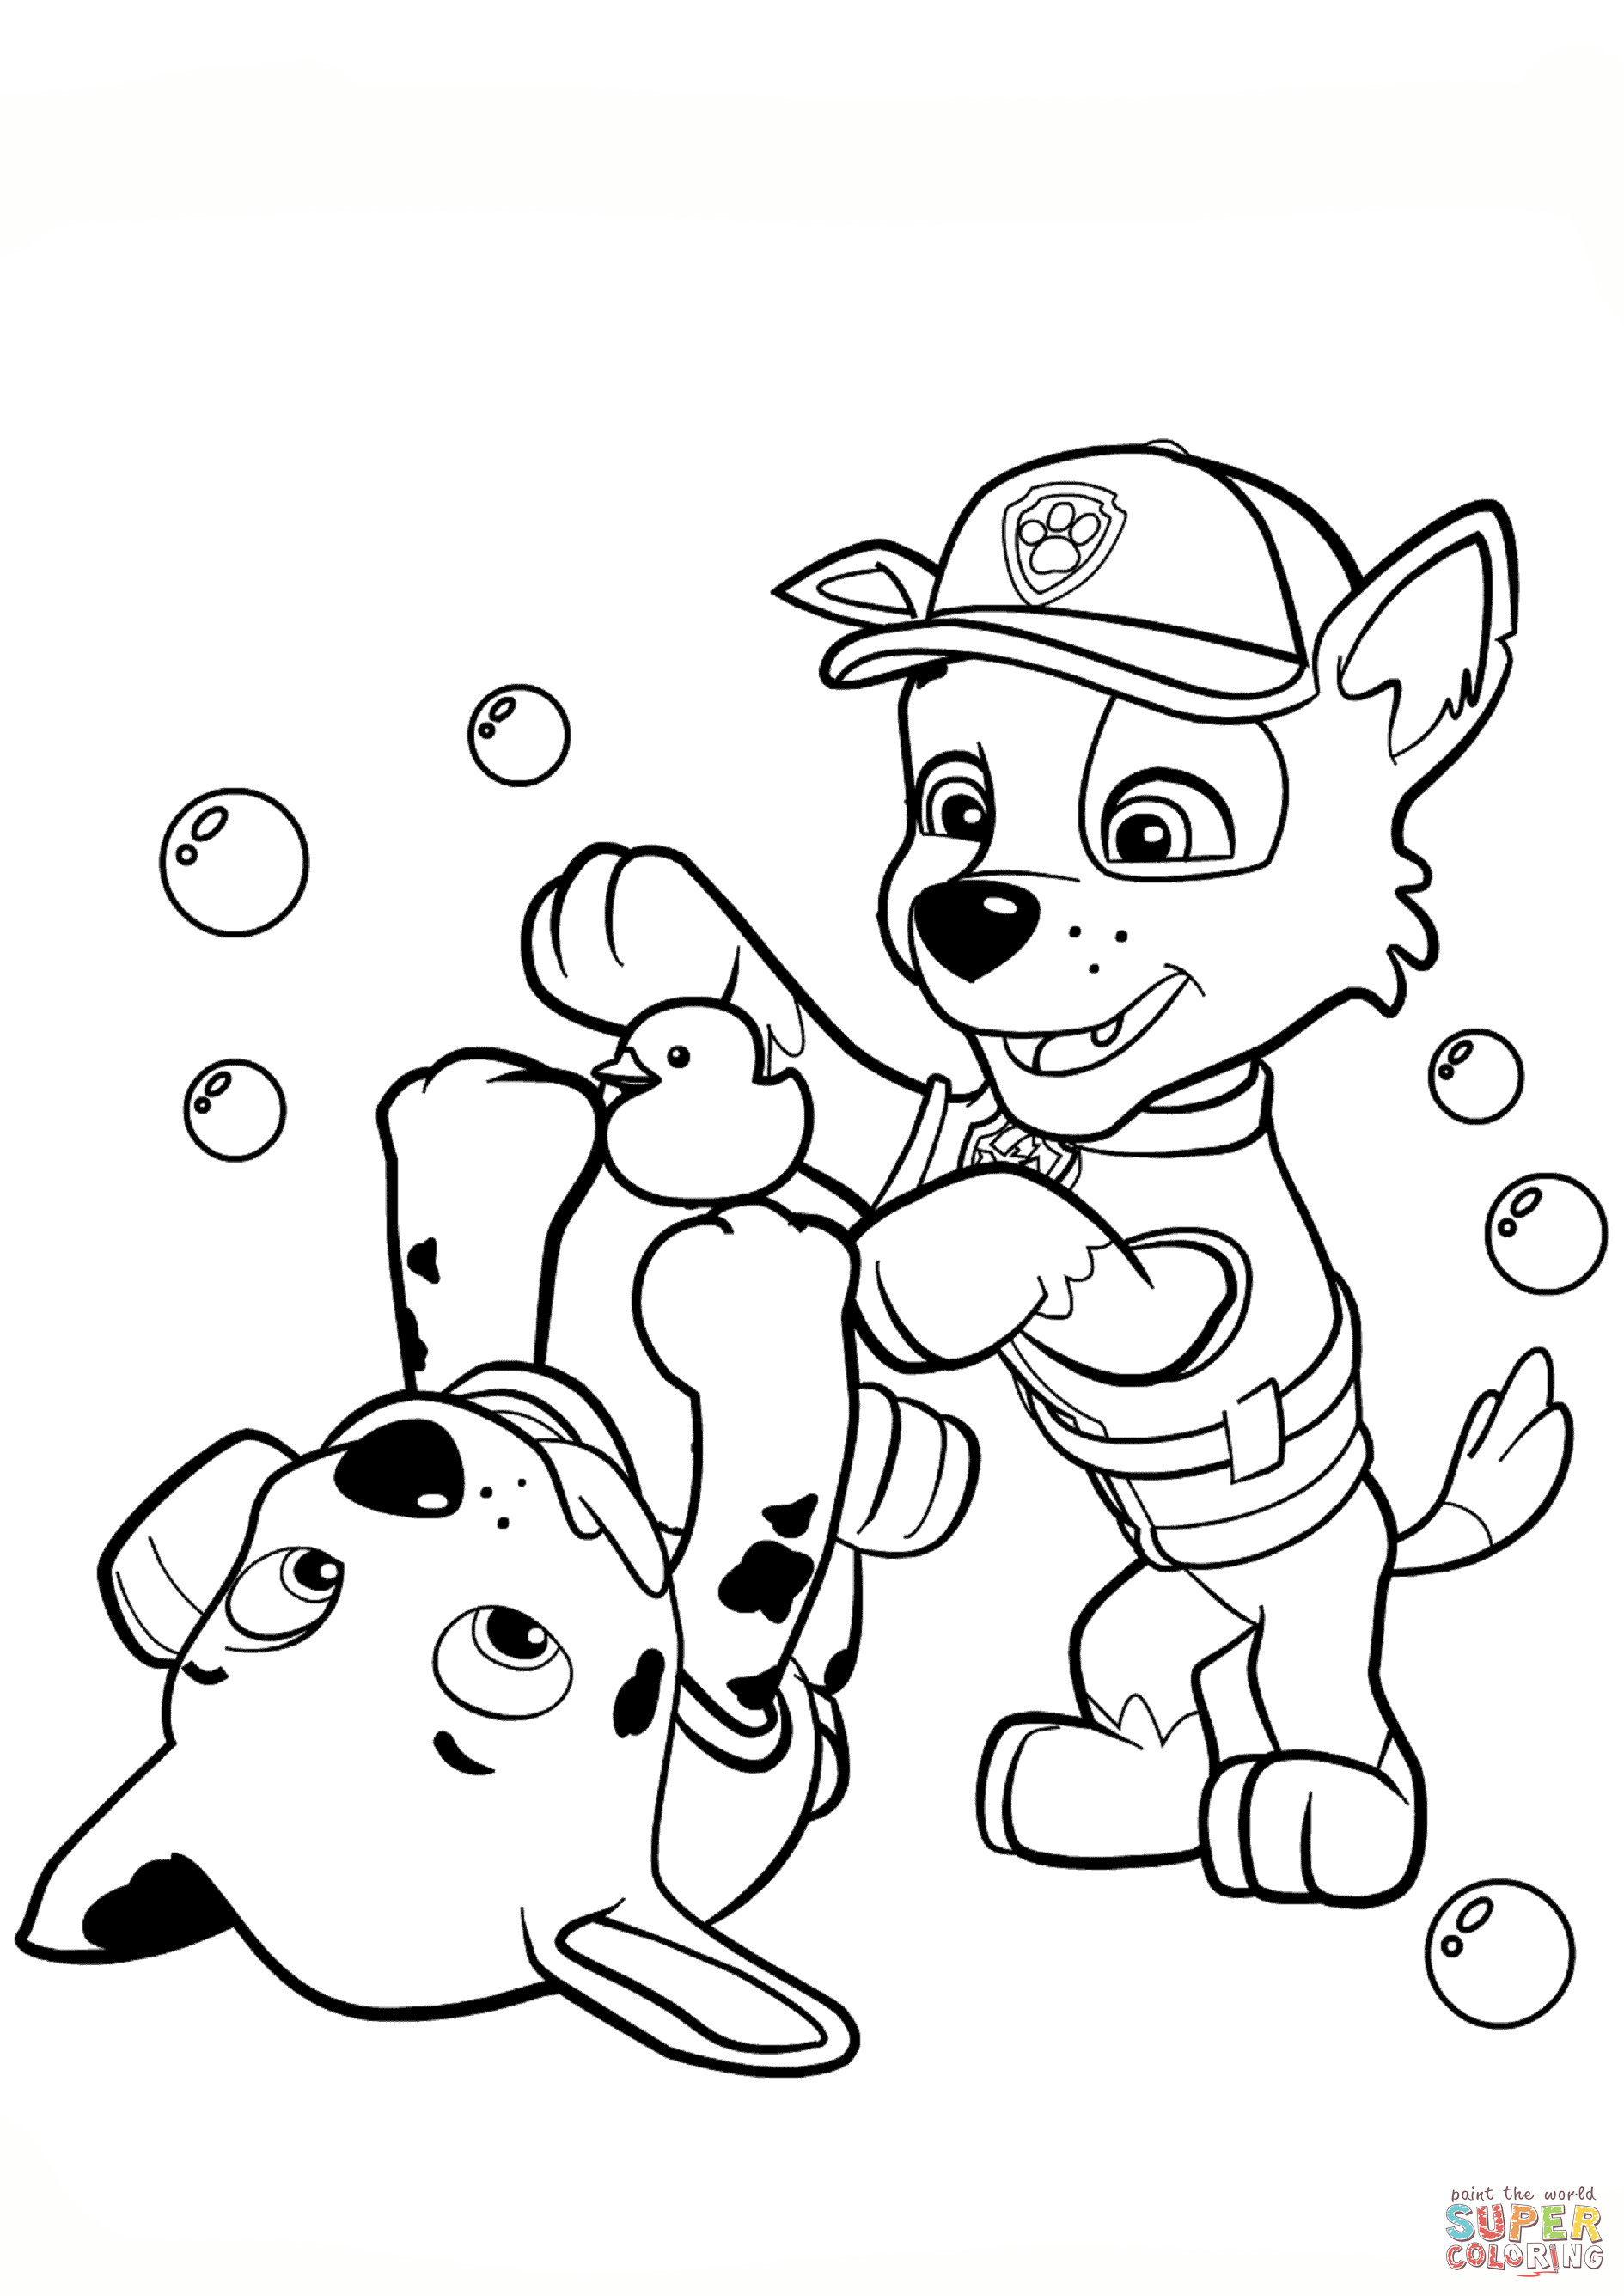 Paw Patrol Printable Coloring Pages
 Paw Patrol Rocky and Marshall coloring page